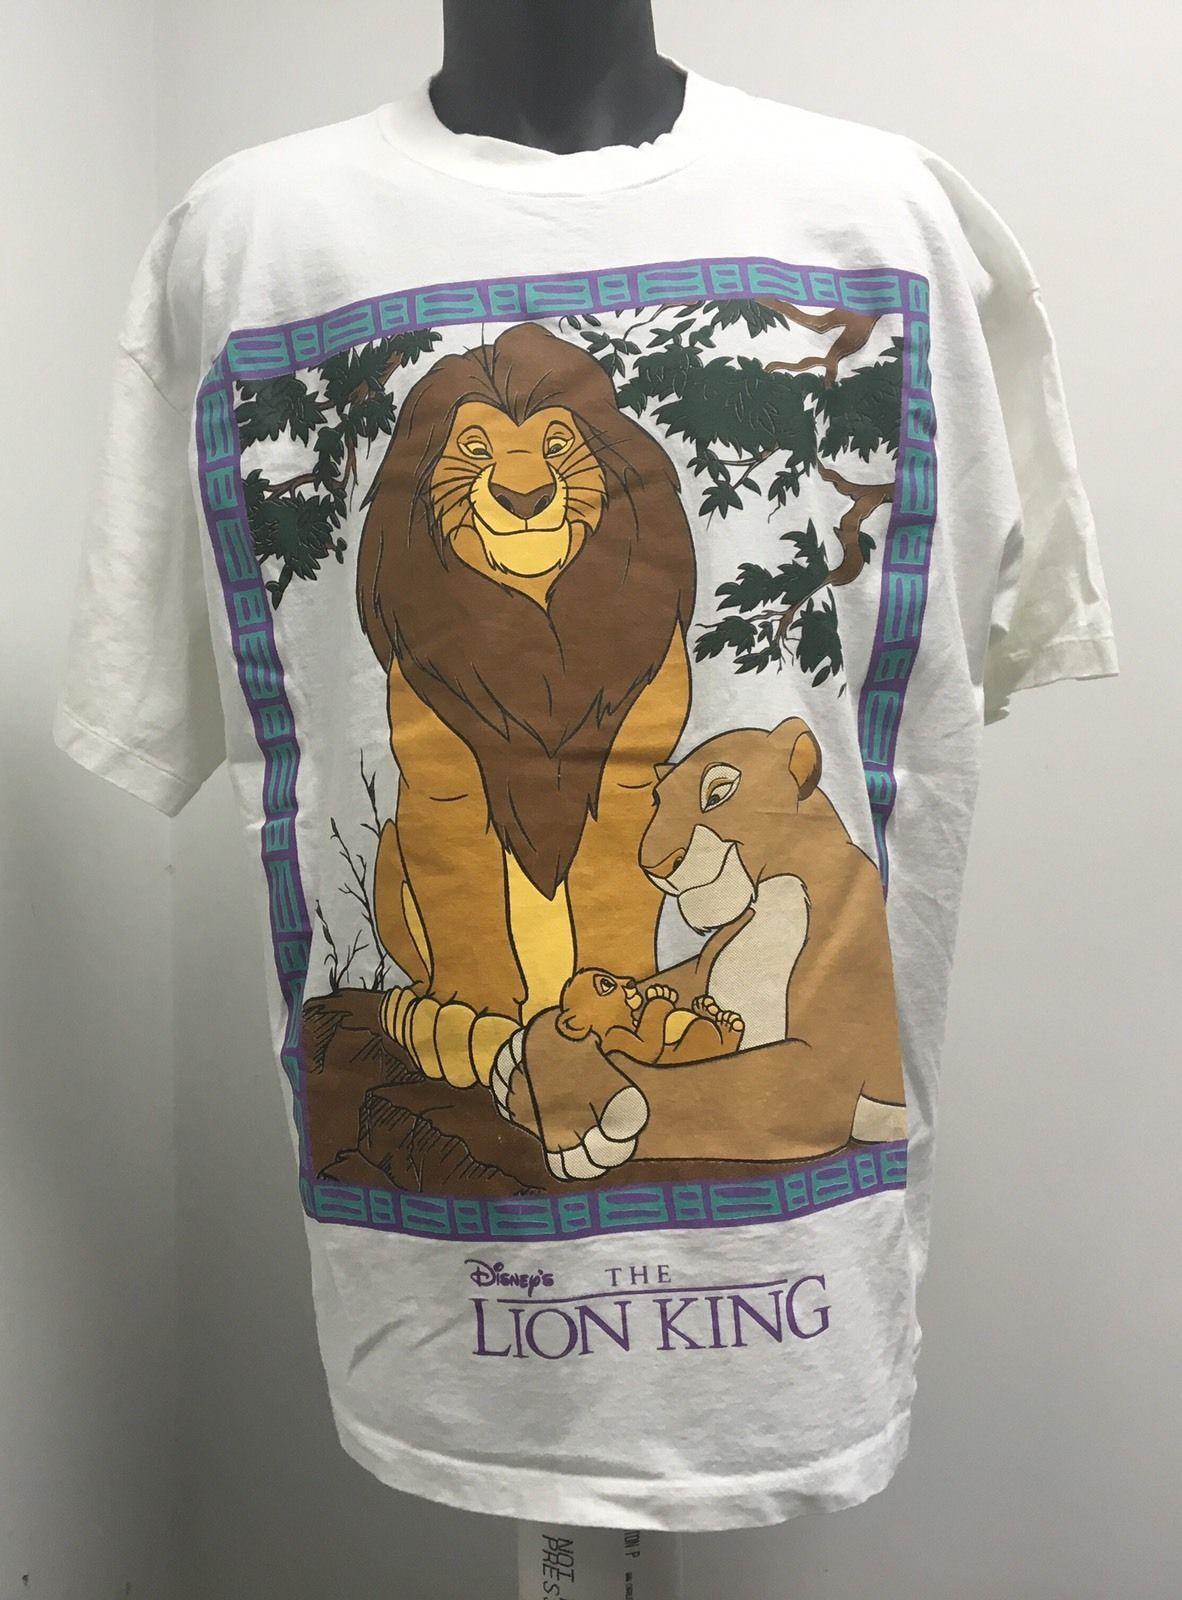 From 90 S Clothing and Apparel Logo - VINTAGE DISNEY The LION KING SHIRT 90s SIMBA RARE WHITE Logo Scar